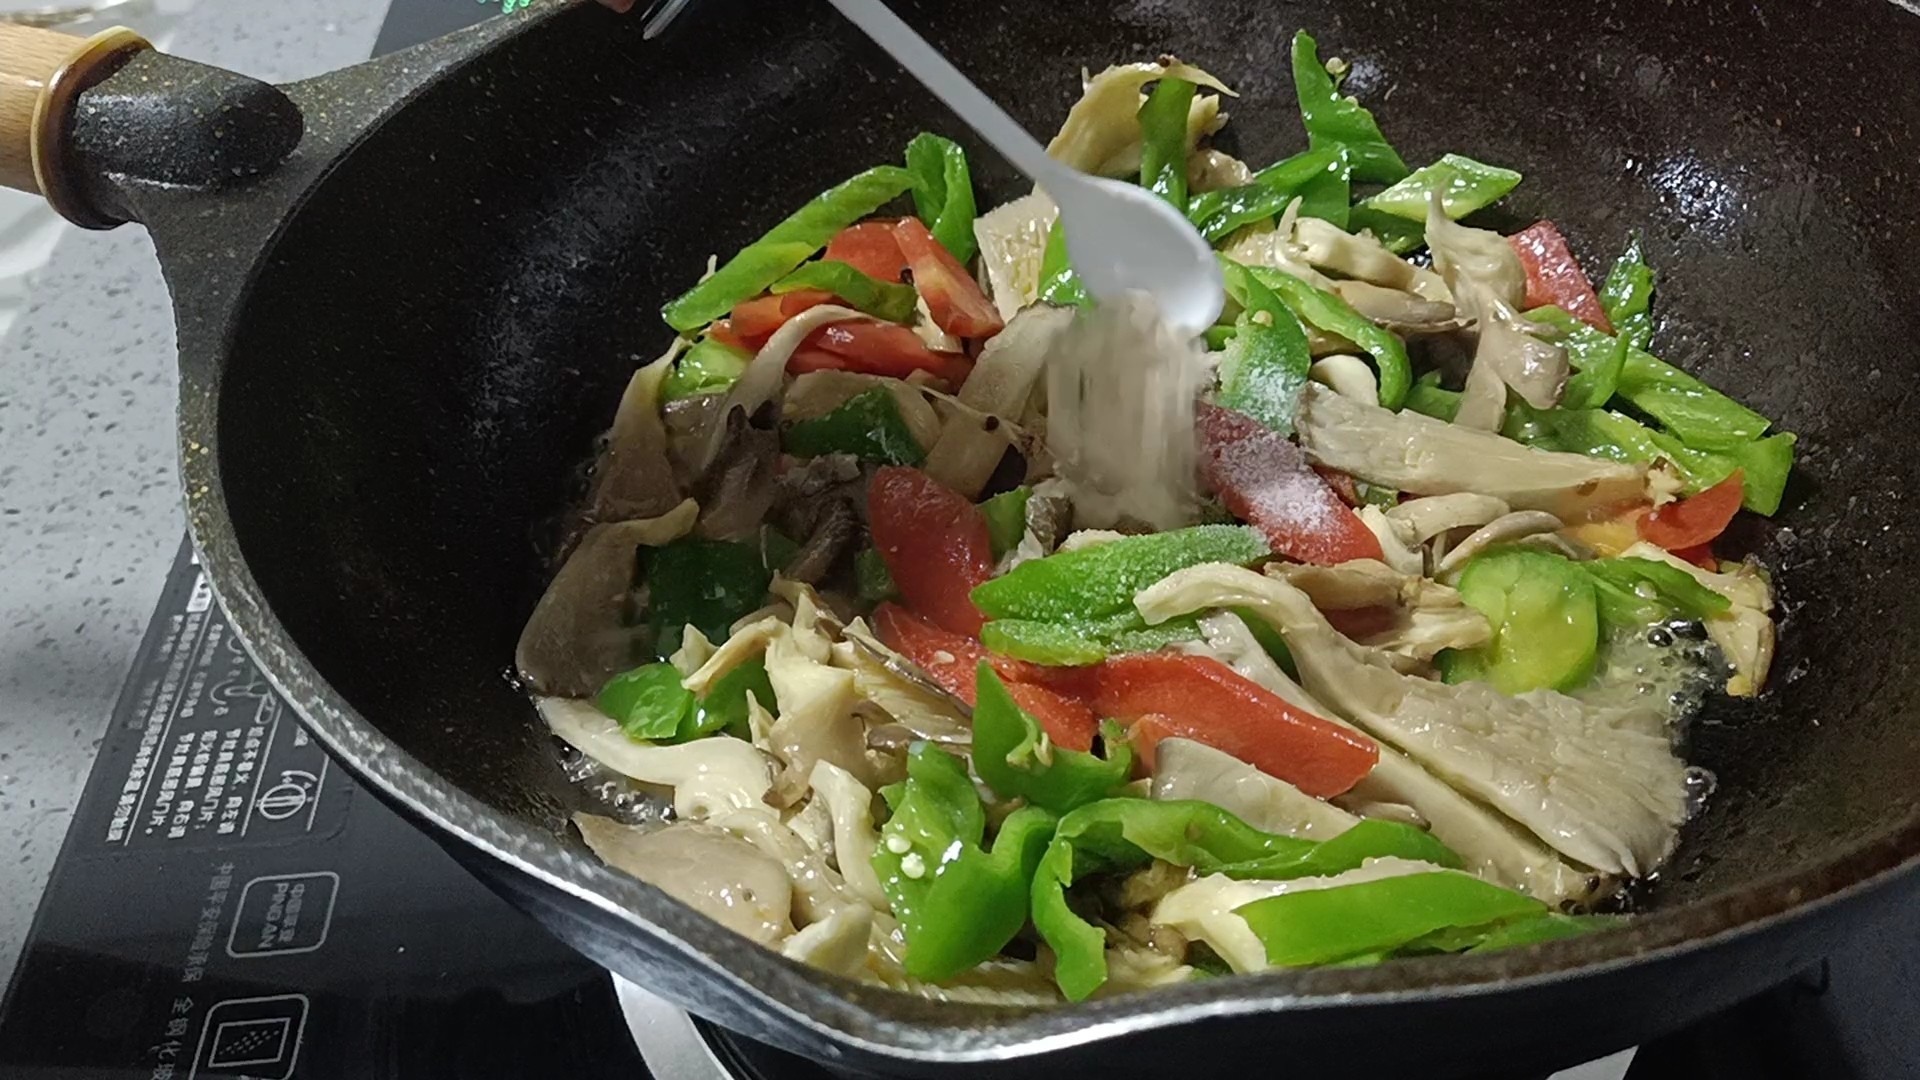 Stir-fried Oyster Mushrooms with Green Peppers are Simple and Easy to Make, Which is More Delicious Than Meat recipe